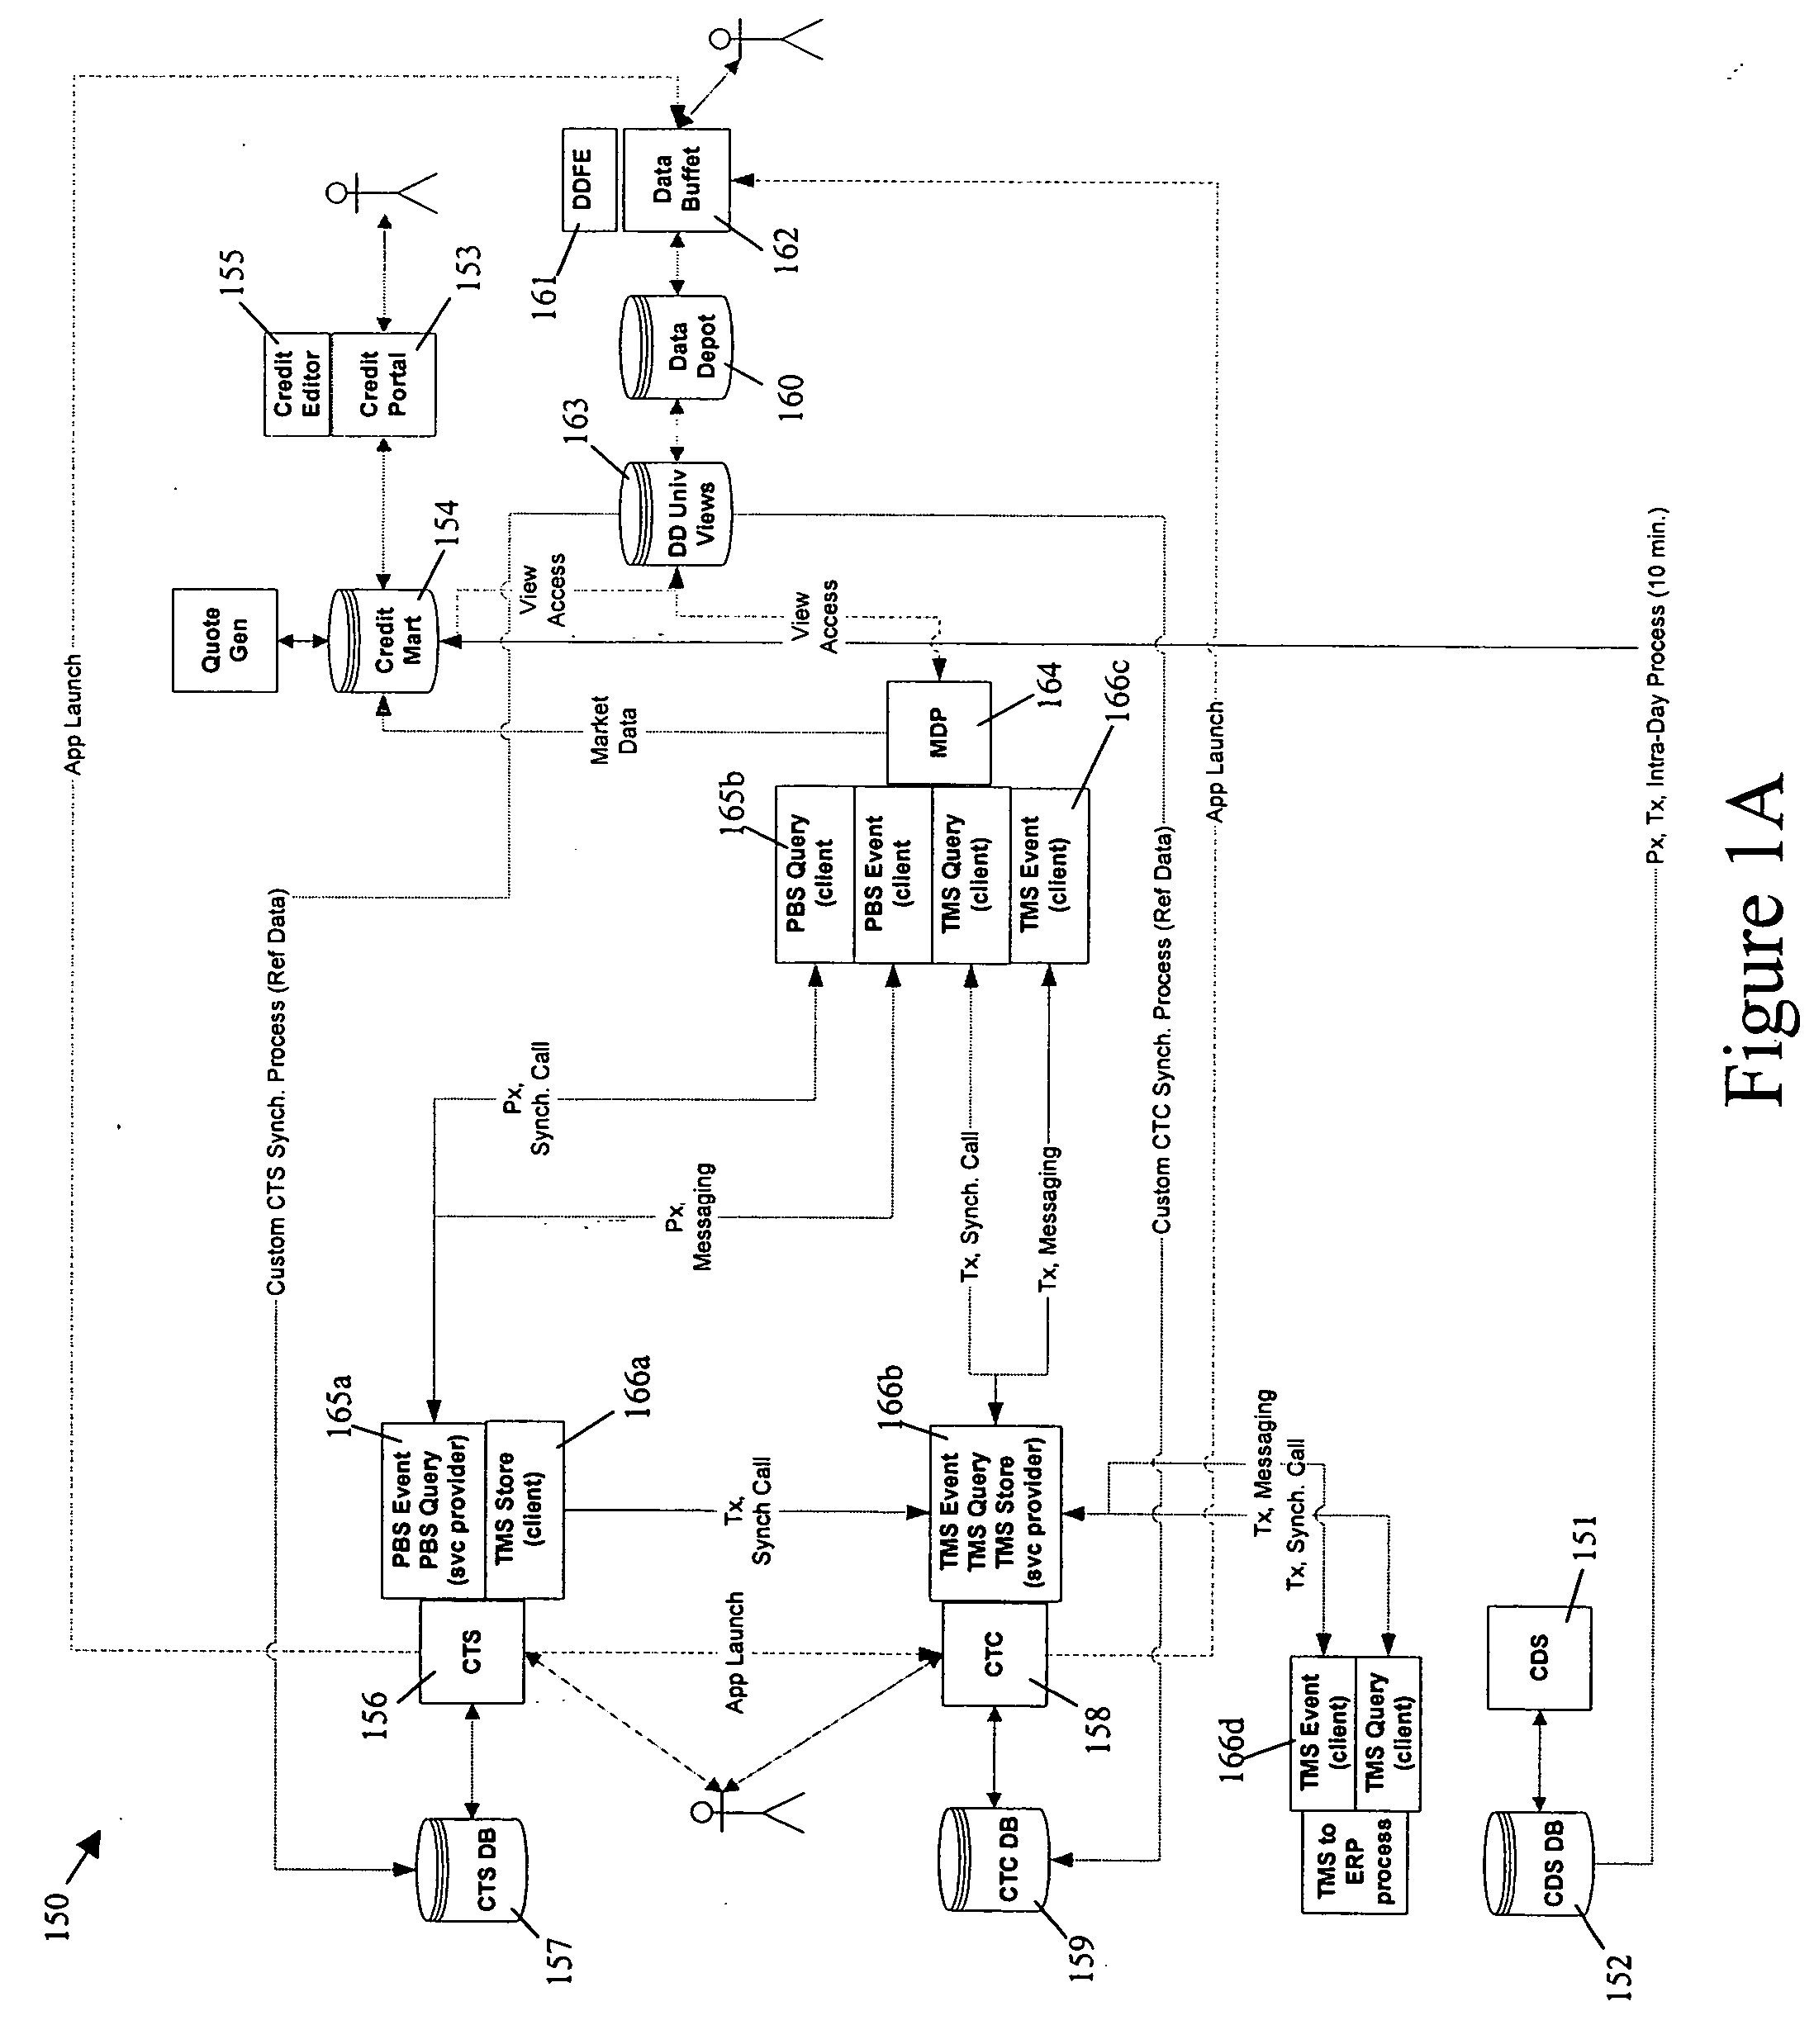 Apparatus, method and system for providing an electronic marketplace for trading credit default swaps and other financial instruments, including a trade management service system